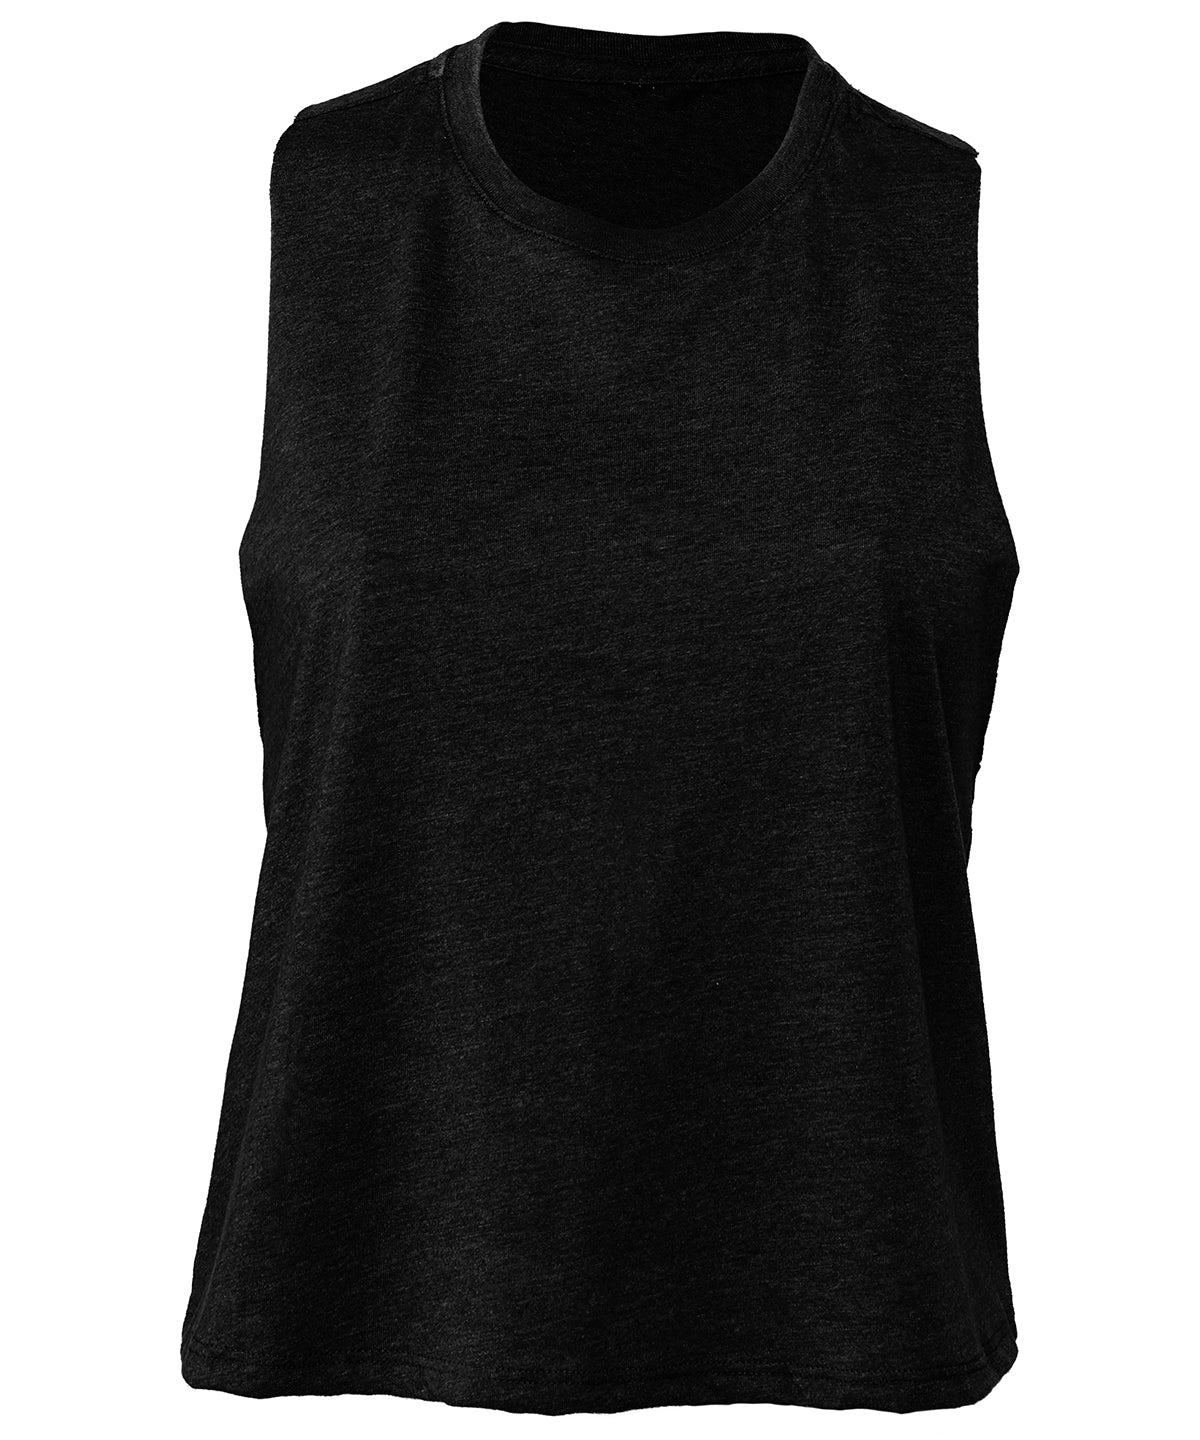 Bella+Canvas BE6682 Women's Racerback Cropped Tank Raw edge arm holes - COOZO